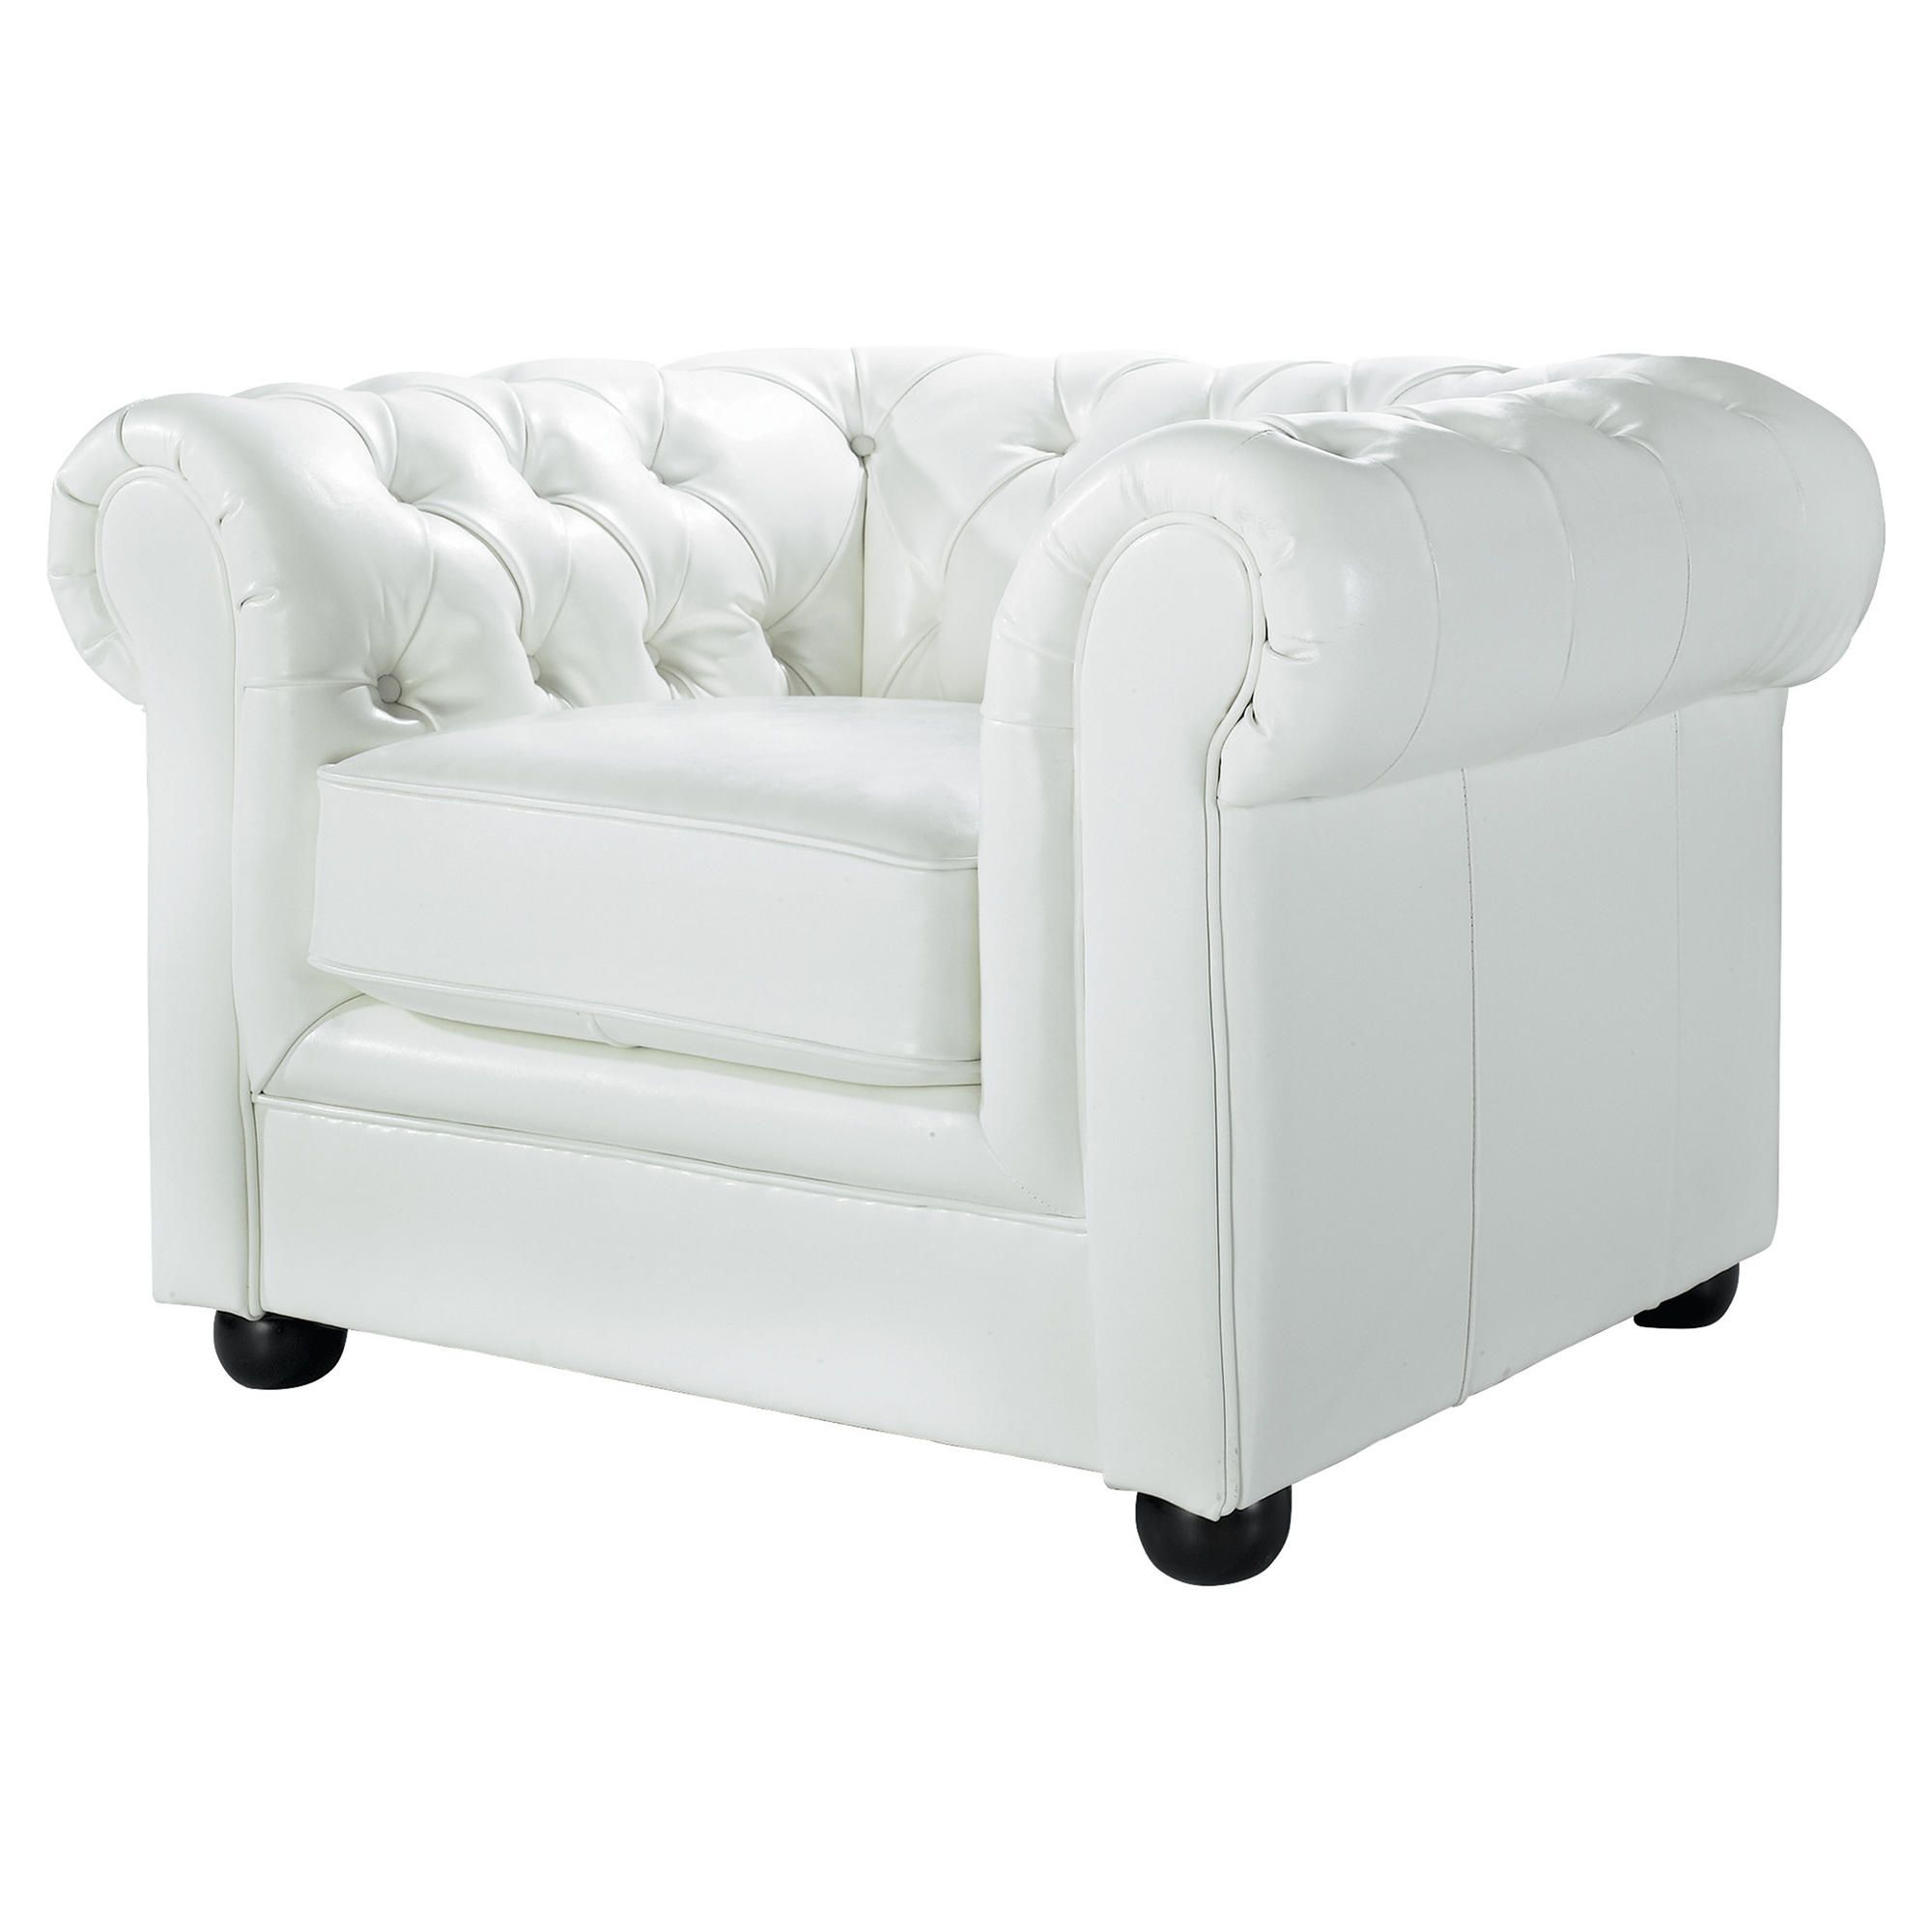 Chesterfield Leather Armchair White at Tesco Direct